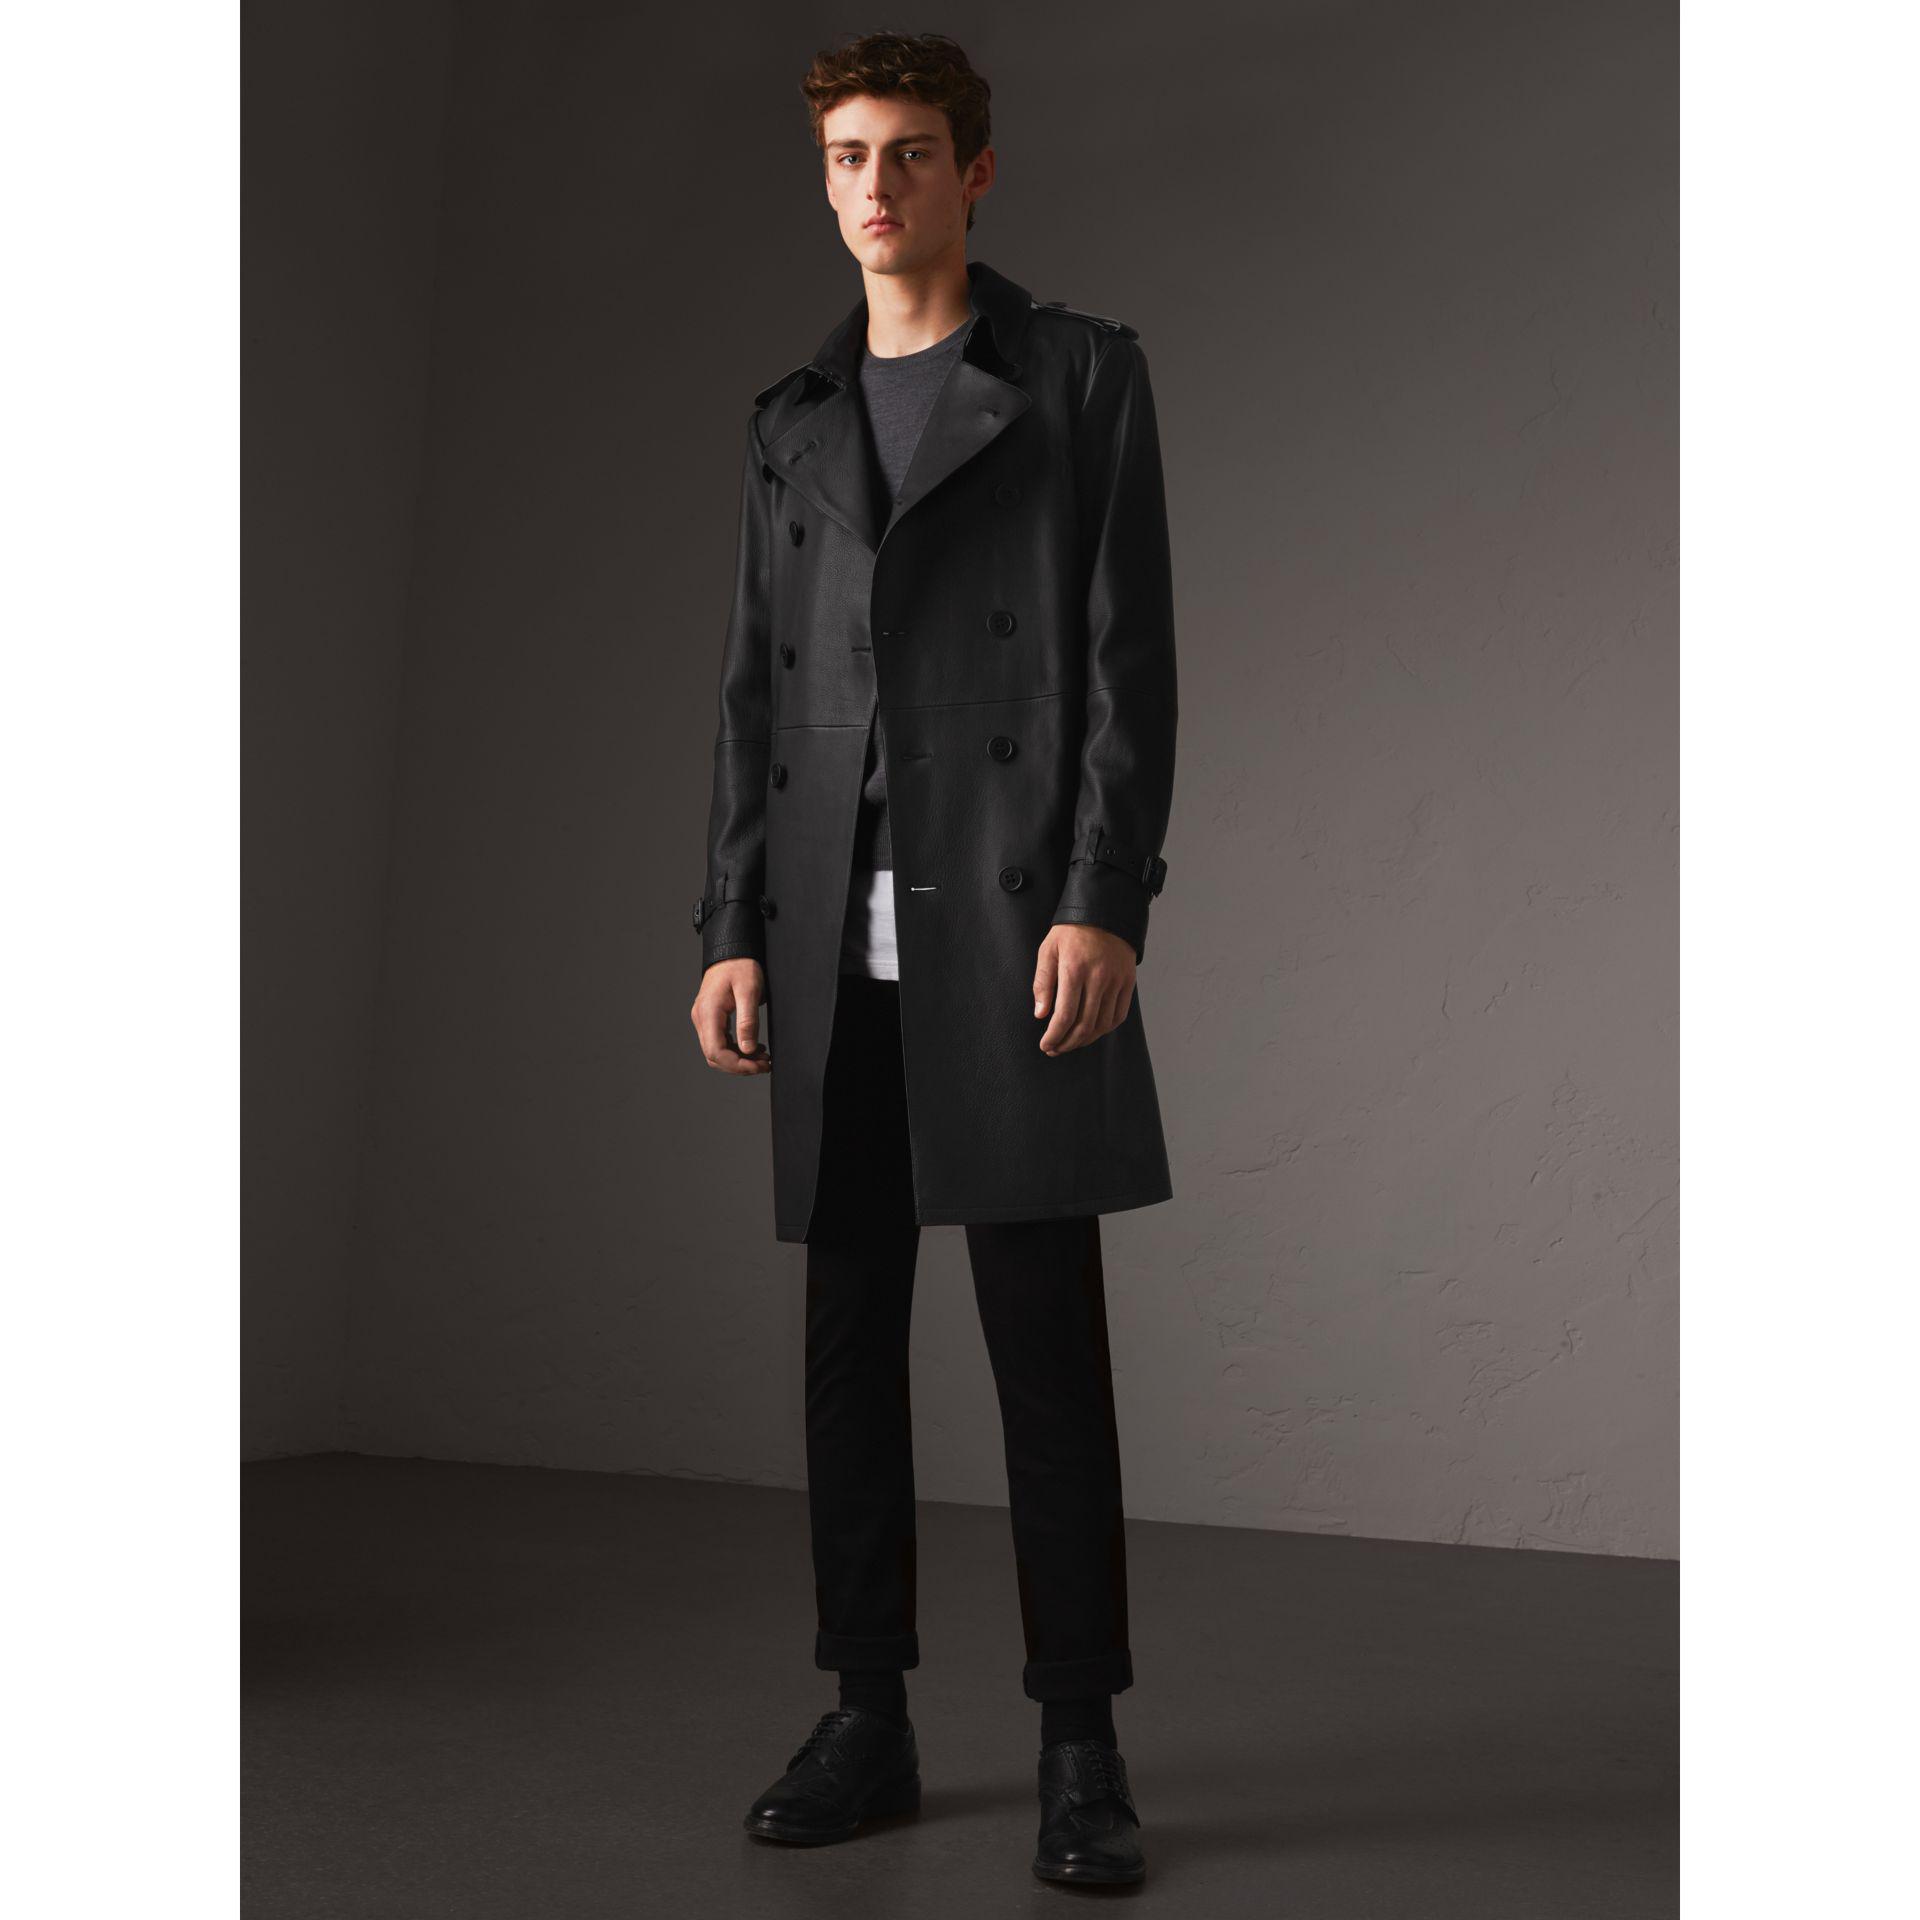 Burberry Midlength Shearling Collar Canvas Trench Coat in Black for Men